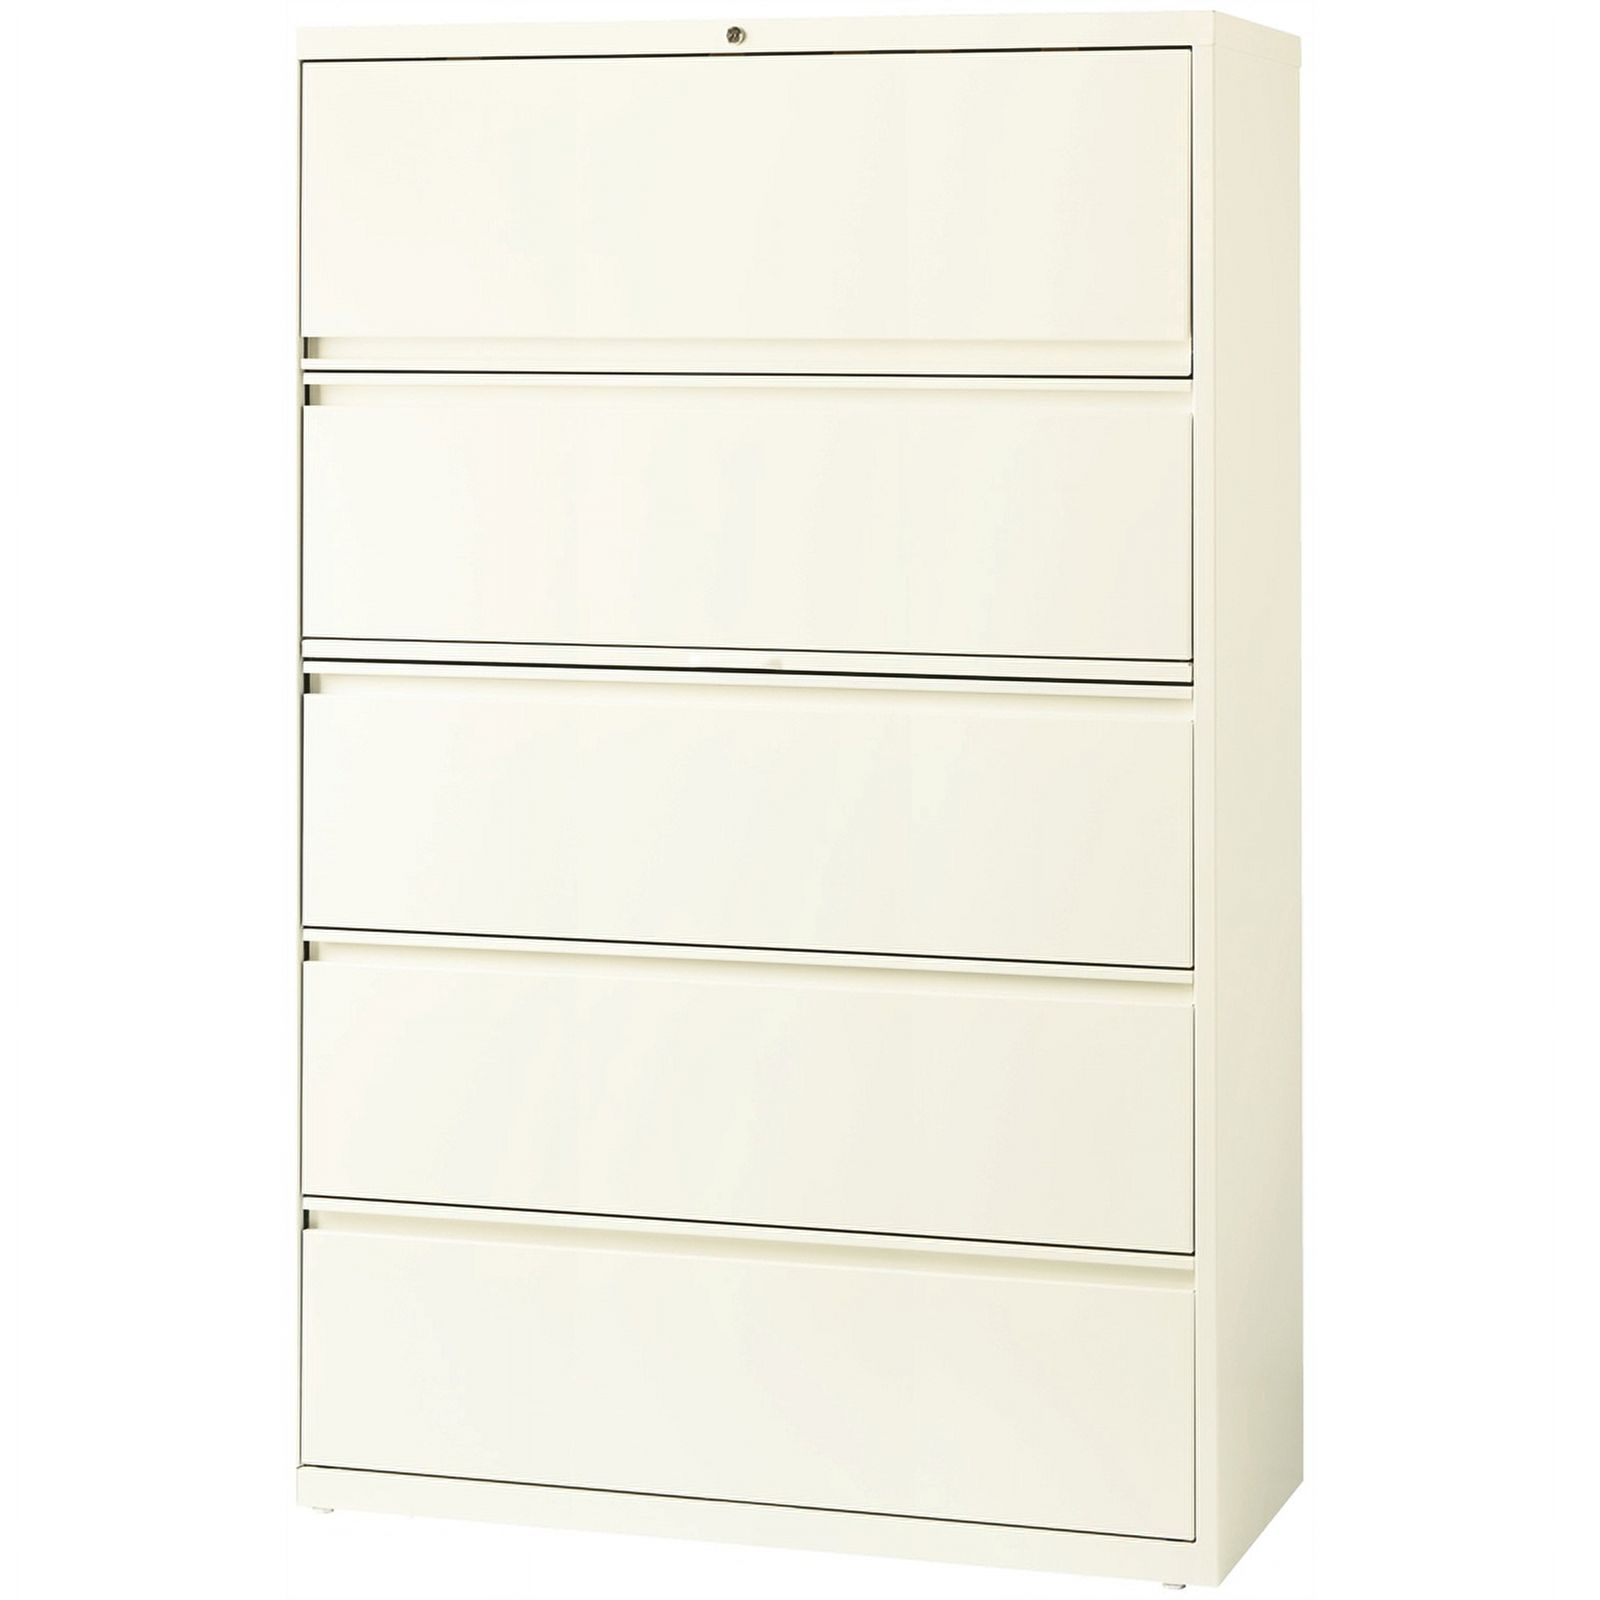 Scranton & Co 42" 5-Drawer Contemporary Metal Lateral File Cabinet in Off White - image 5 of 5